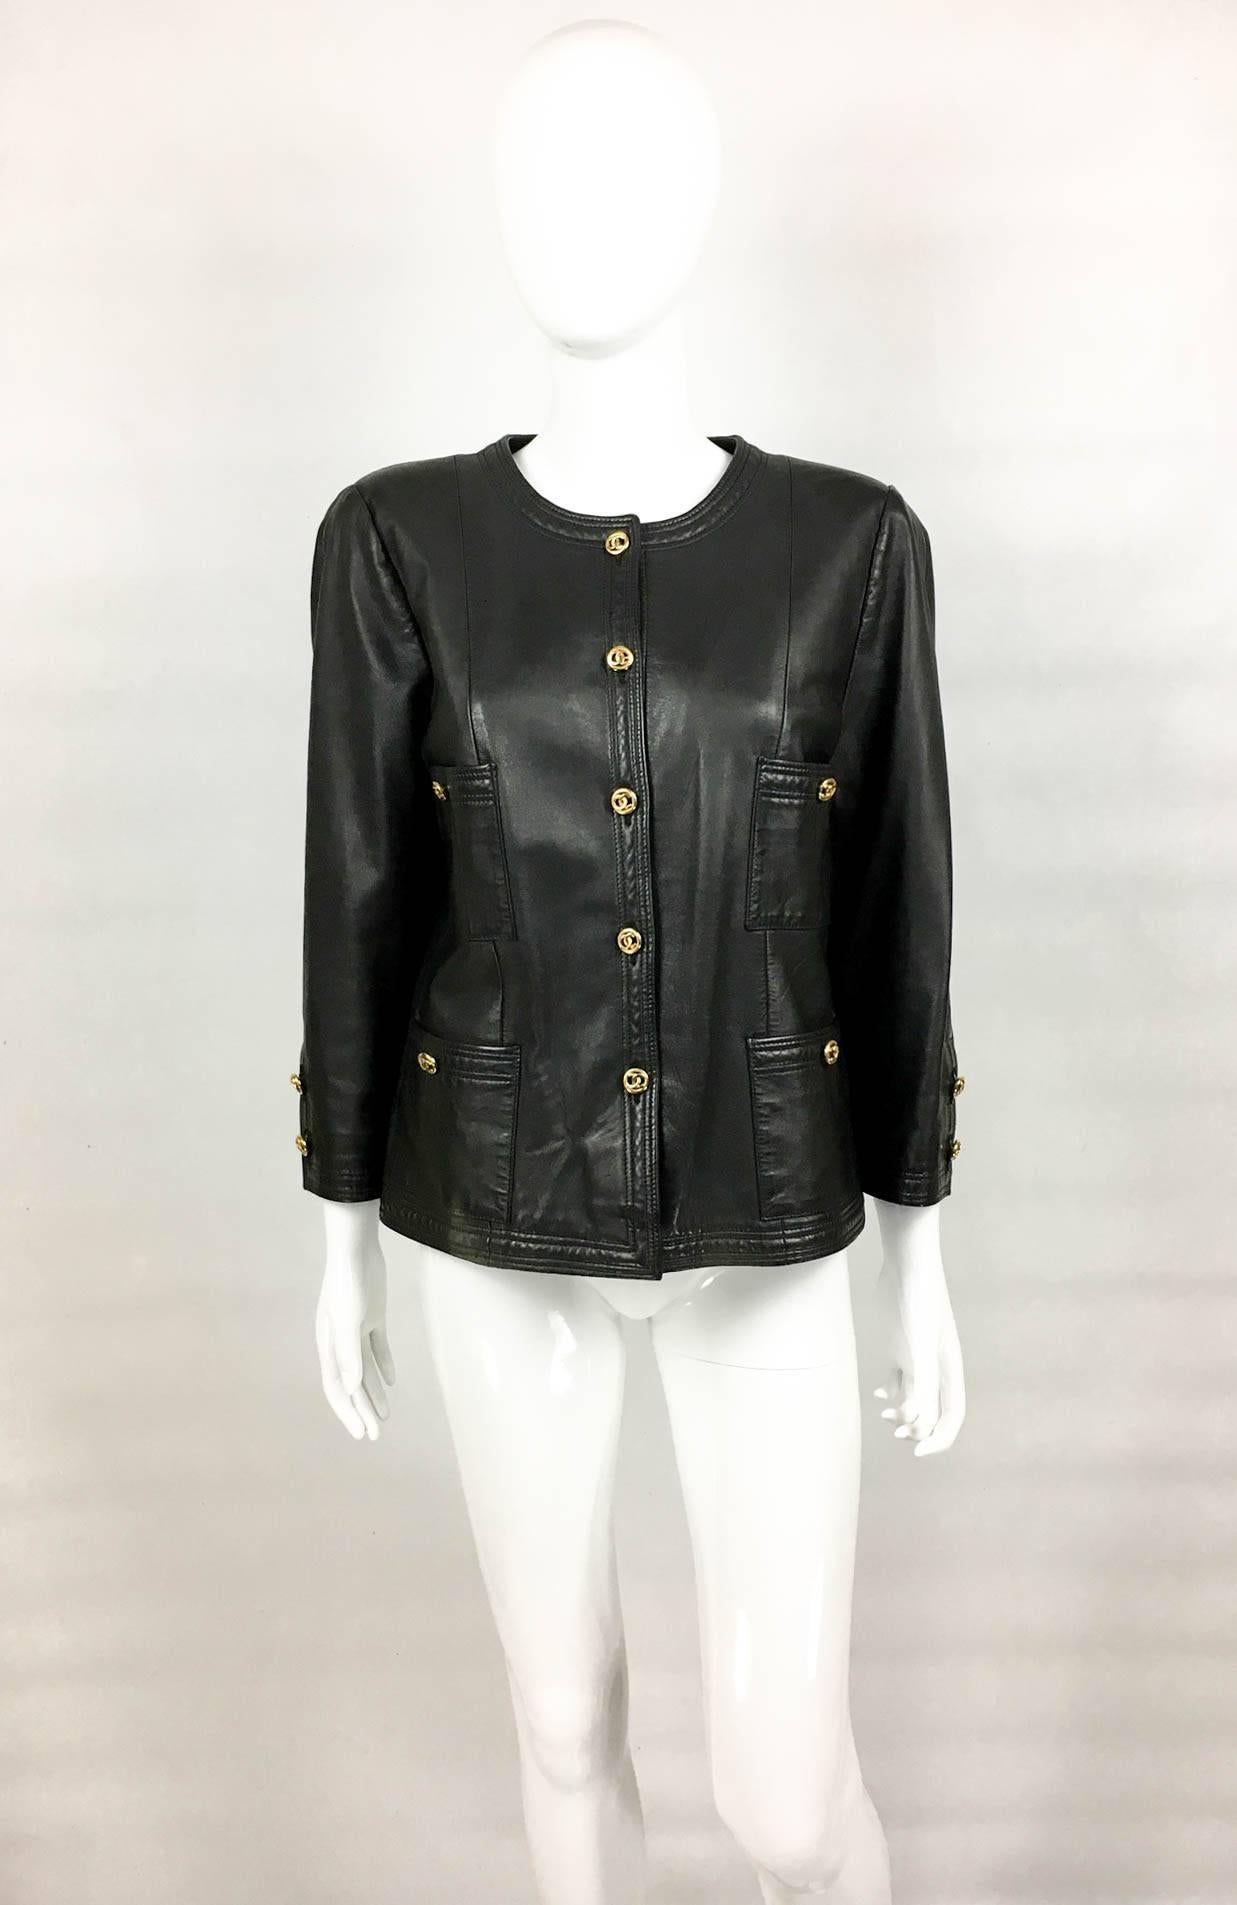 Women's Chanel Black Leather Jacket With Gold-Tone Logo Buttons - 1980s